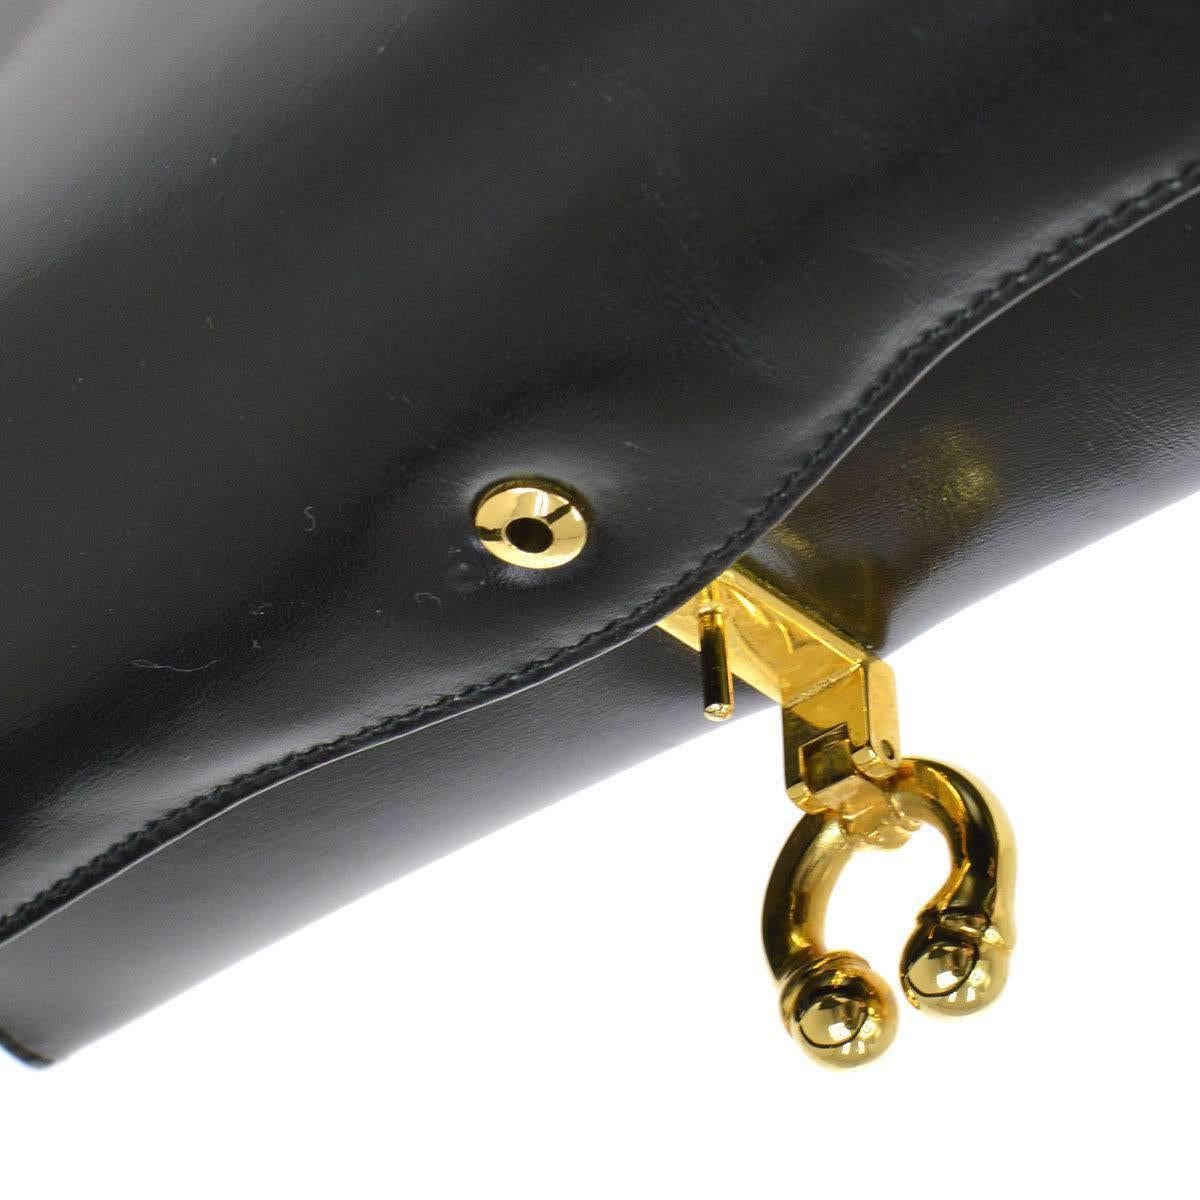 Gucci Black Leather Gold Kelly Style Party Evening Top Handle Satchel Bag

Leather
Gold tone hardware
Leather lining 
Turnlock closure 
Made in Italy
Handle drop 6